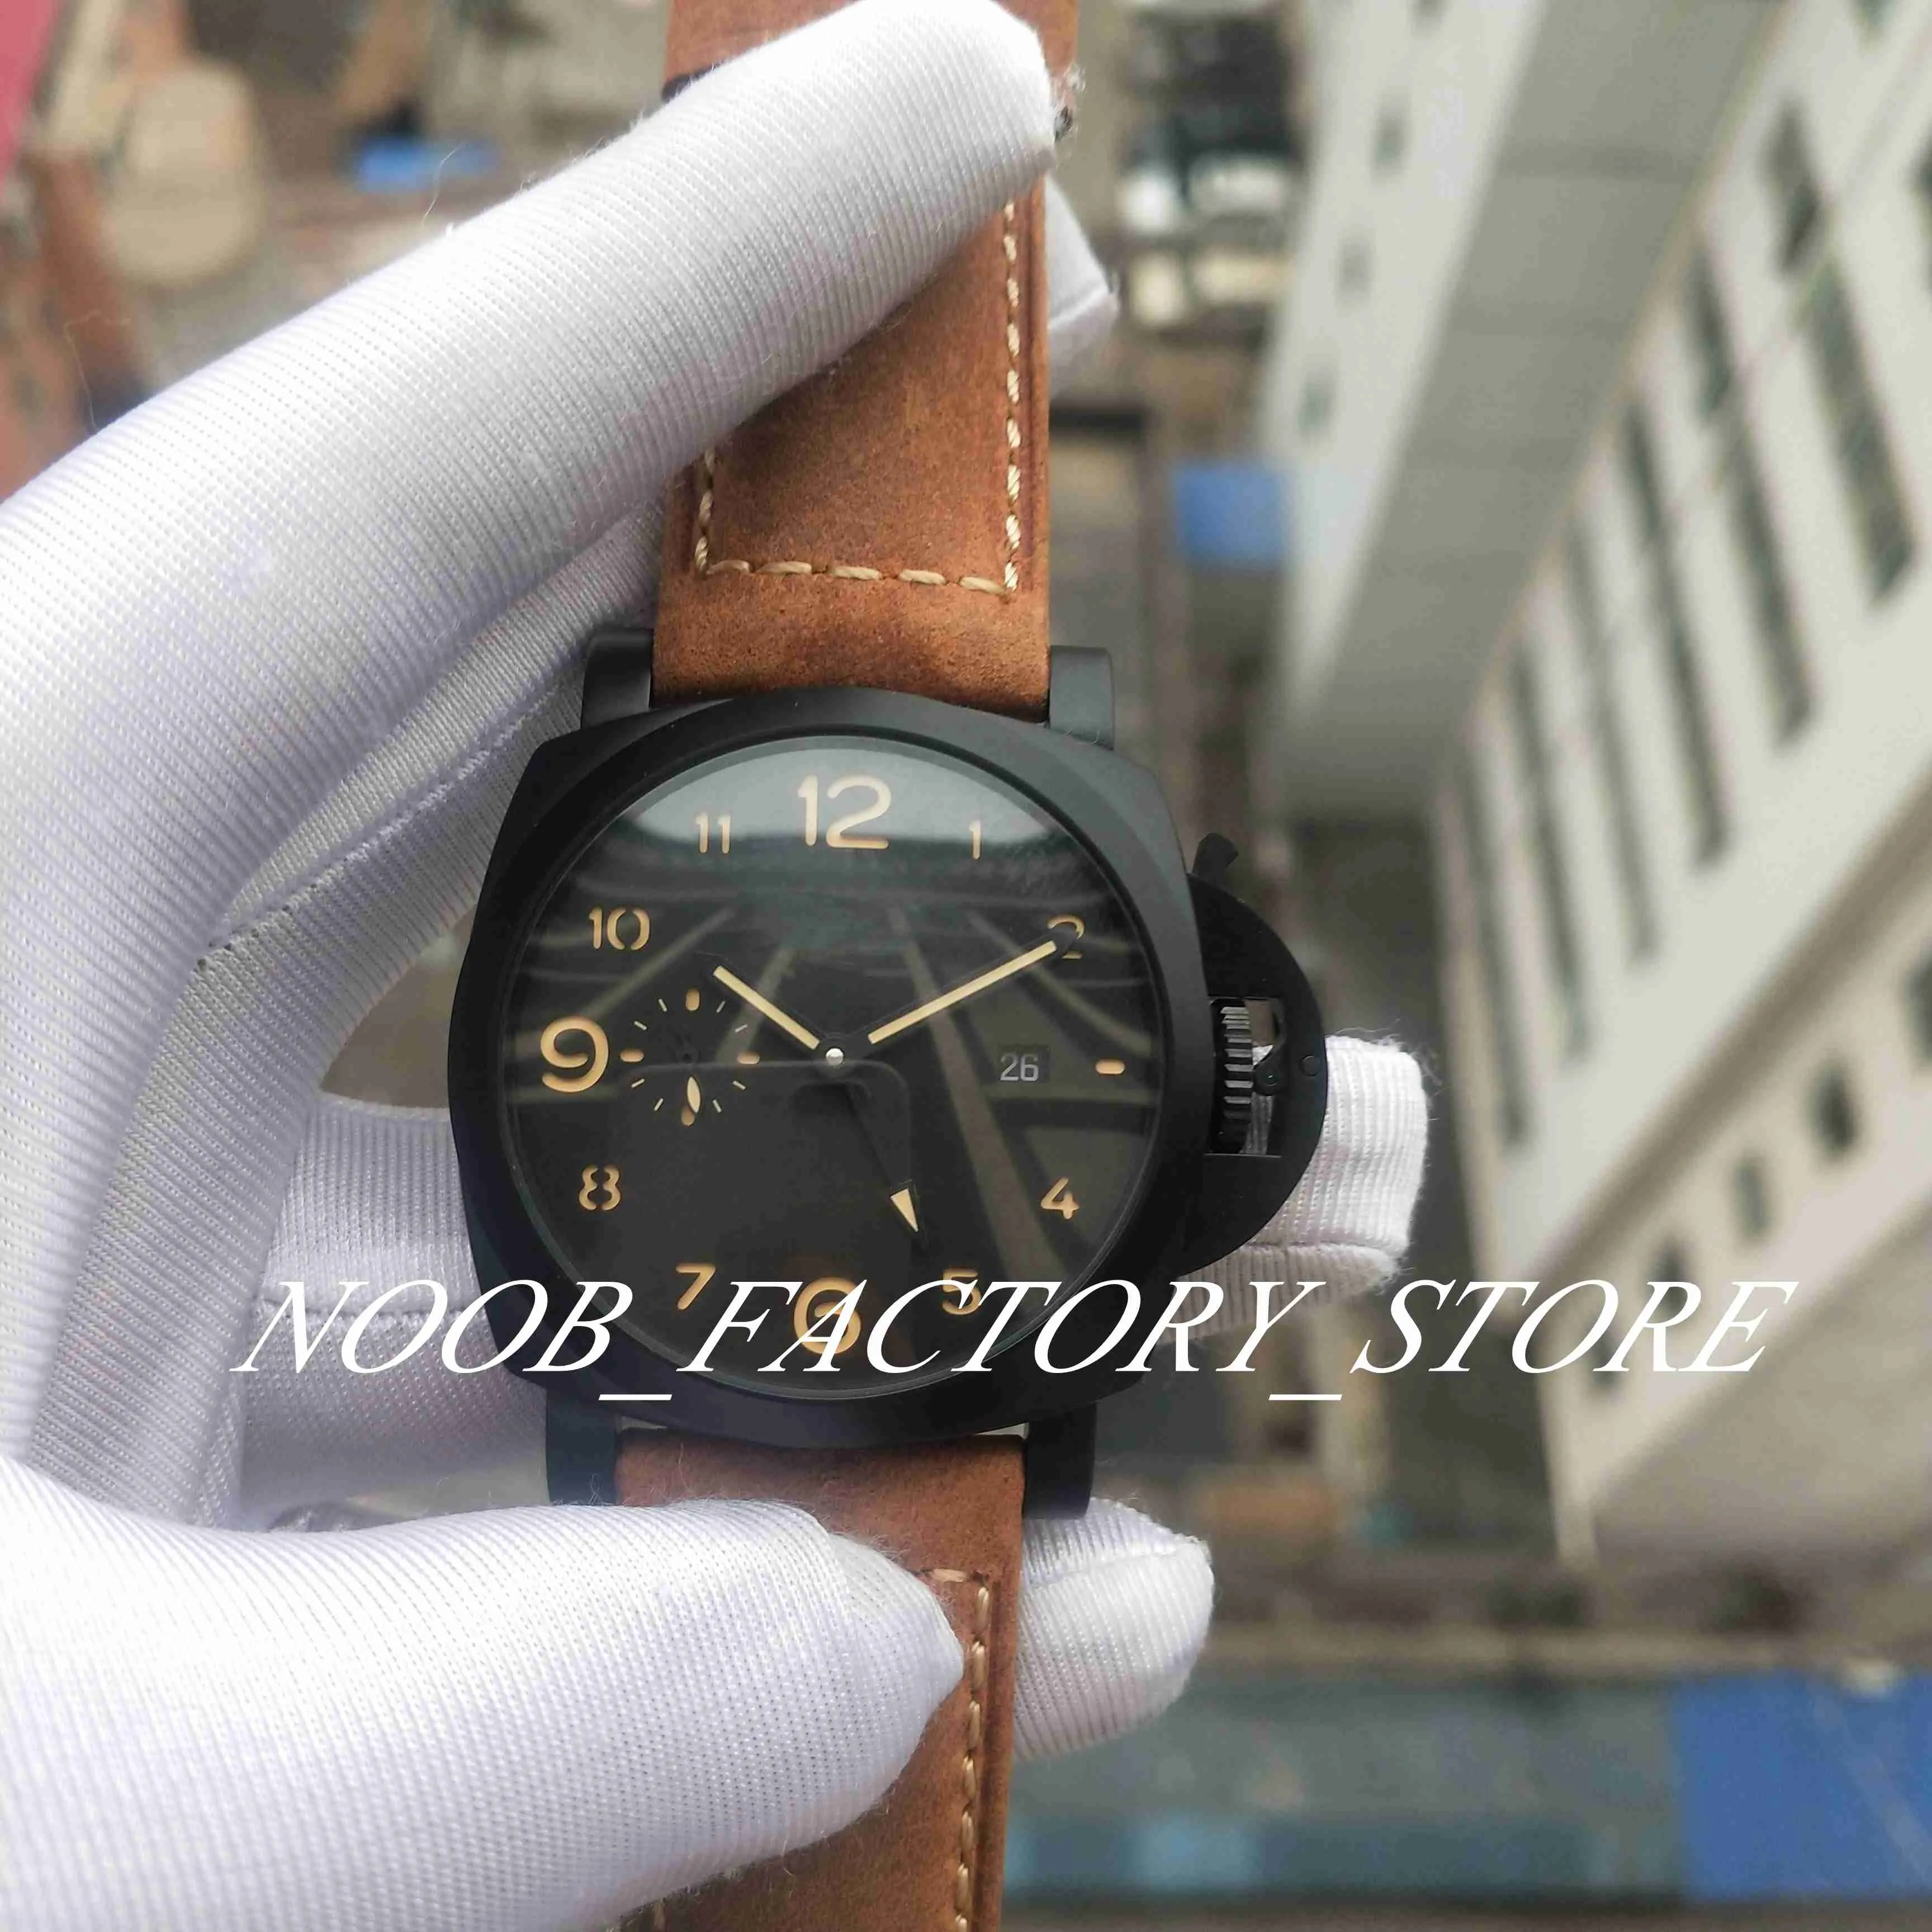 Super Factory Sales Watch of Me 1950 Classic Real Photo 44mm Black Face Brown Strap 441 Automatic Movement Fashion Luminous Wristwatch Watches With Original Box